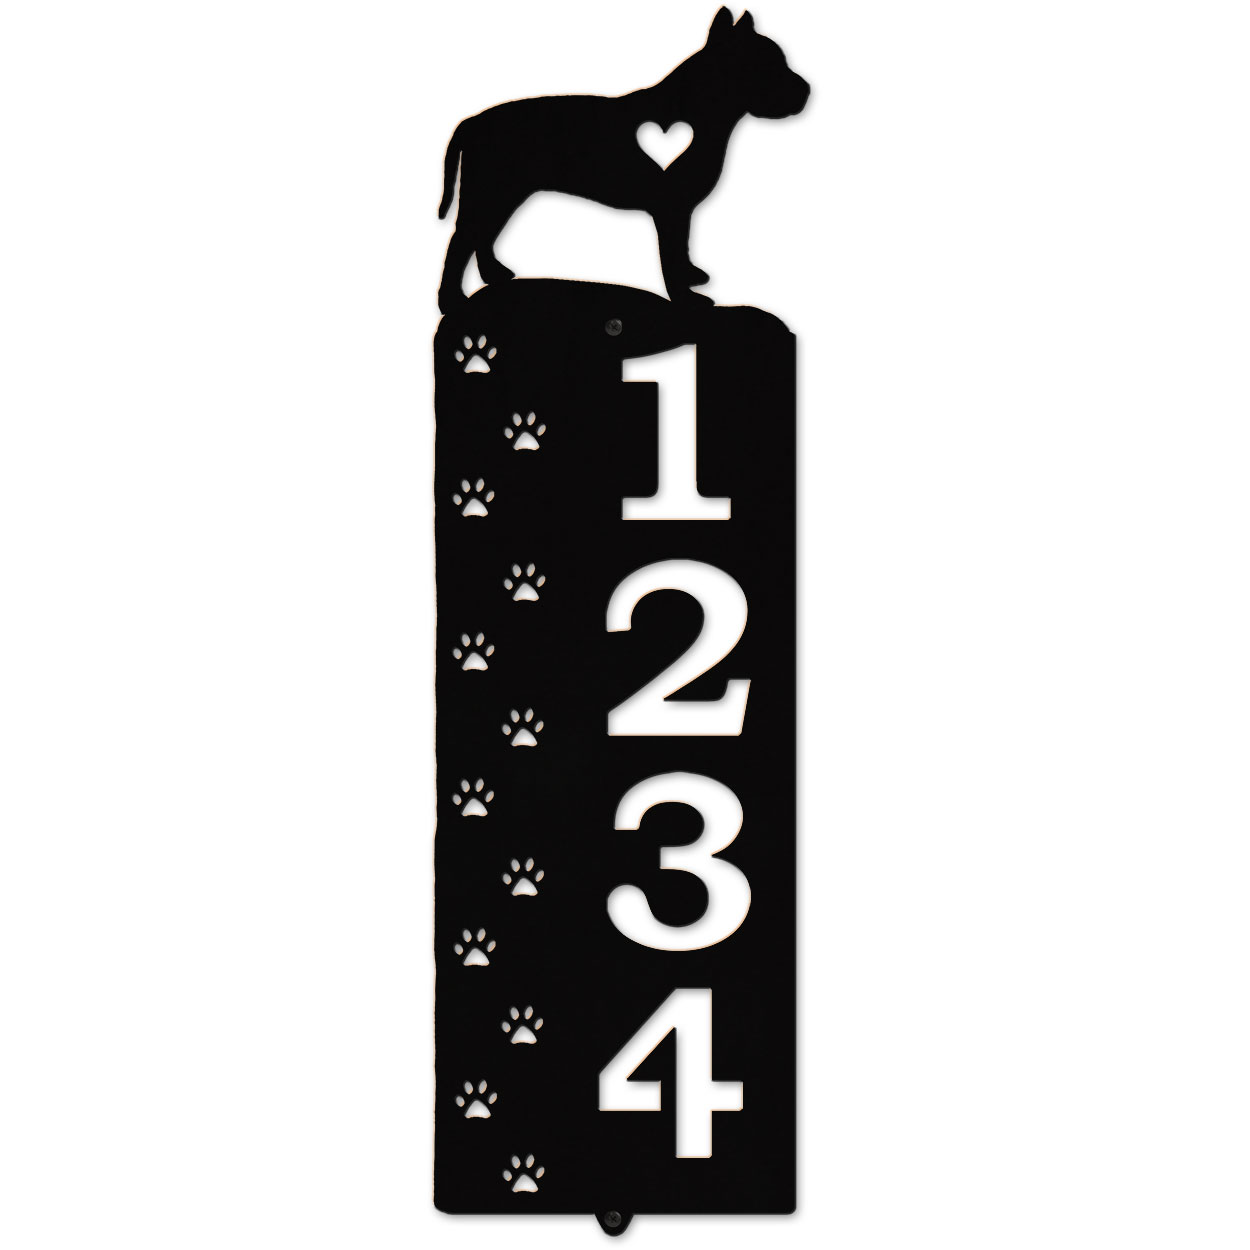 636274 - Pitbull Terrier Cut-Outs Four Digit Address Number Plaque - Choose Size and Color